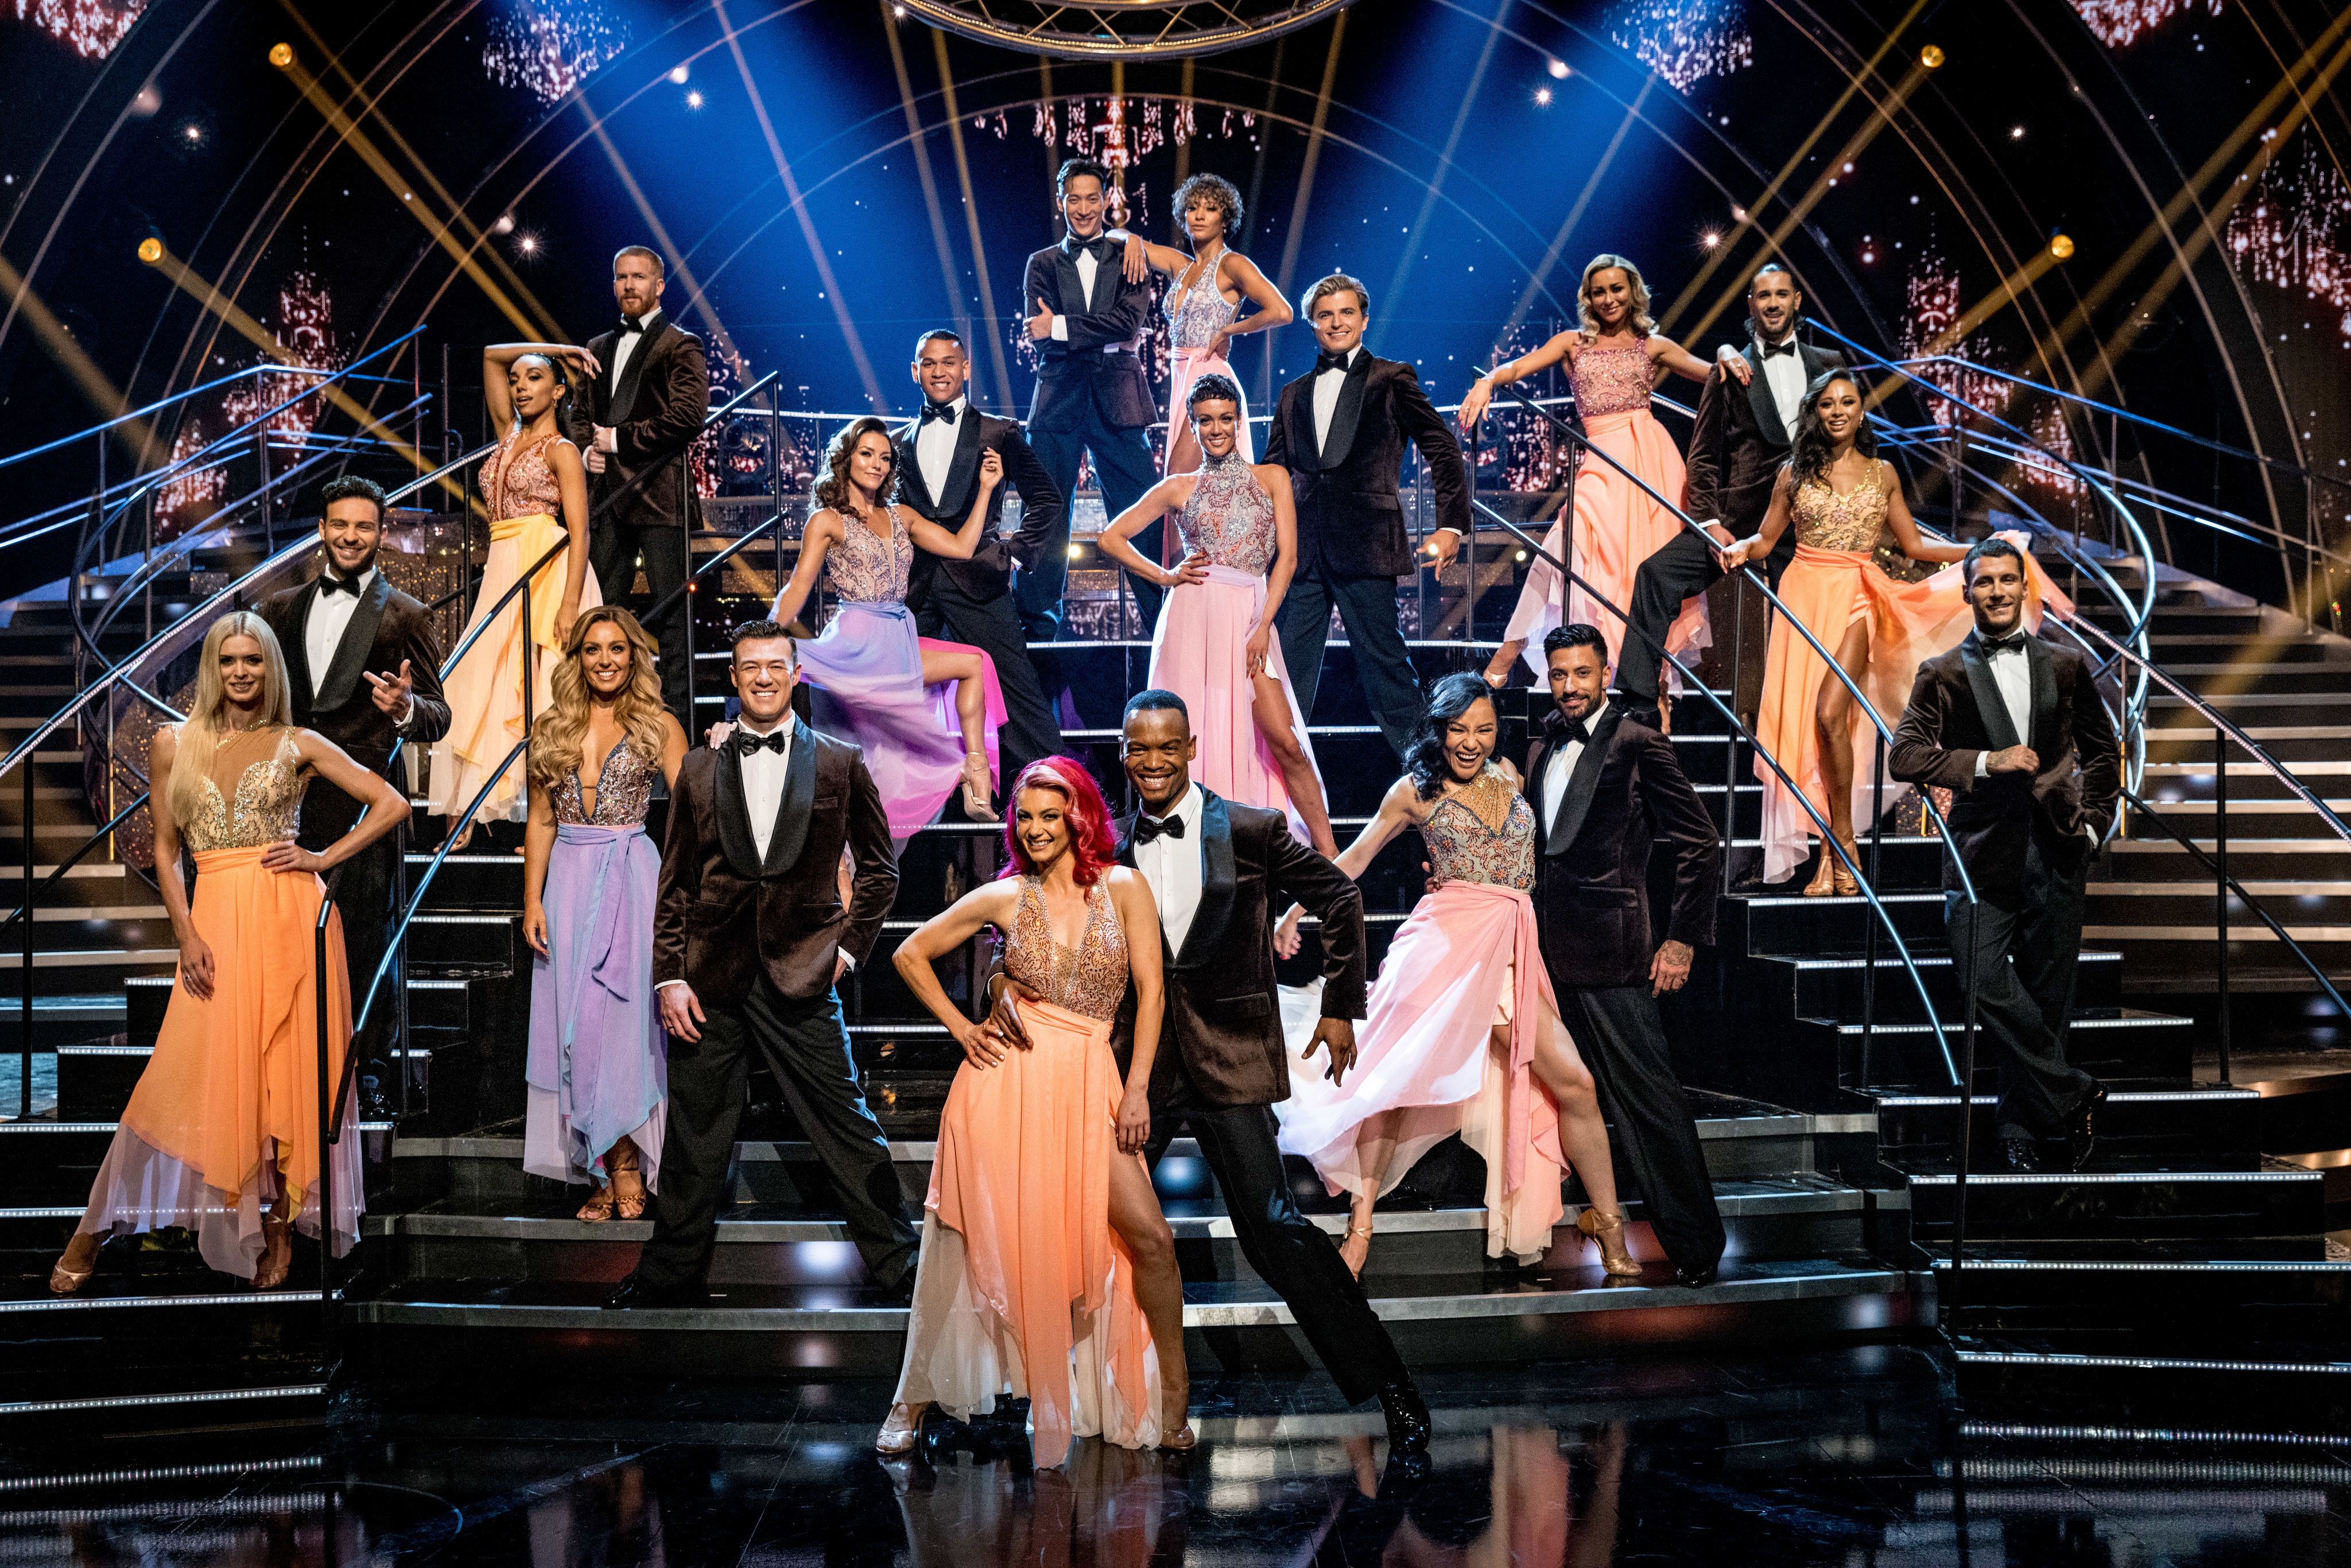 The professional dancers of Strictly Come Dancing